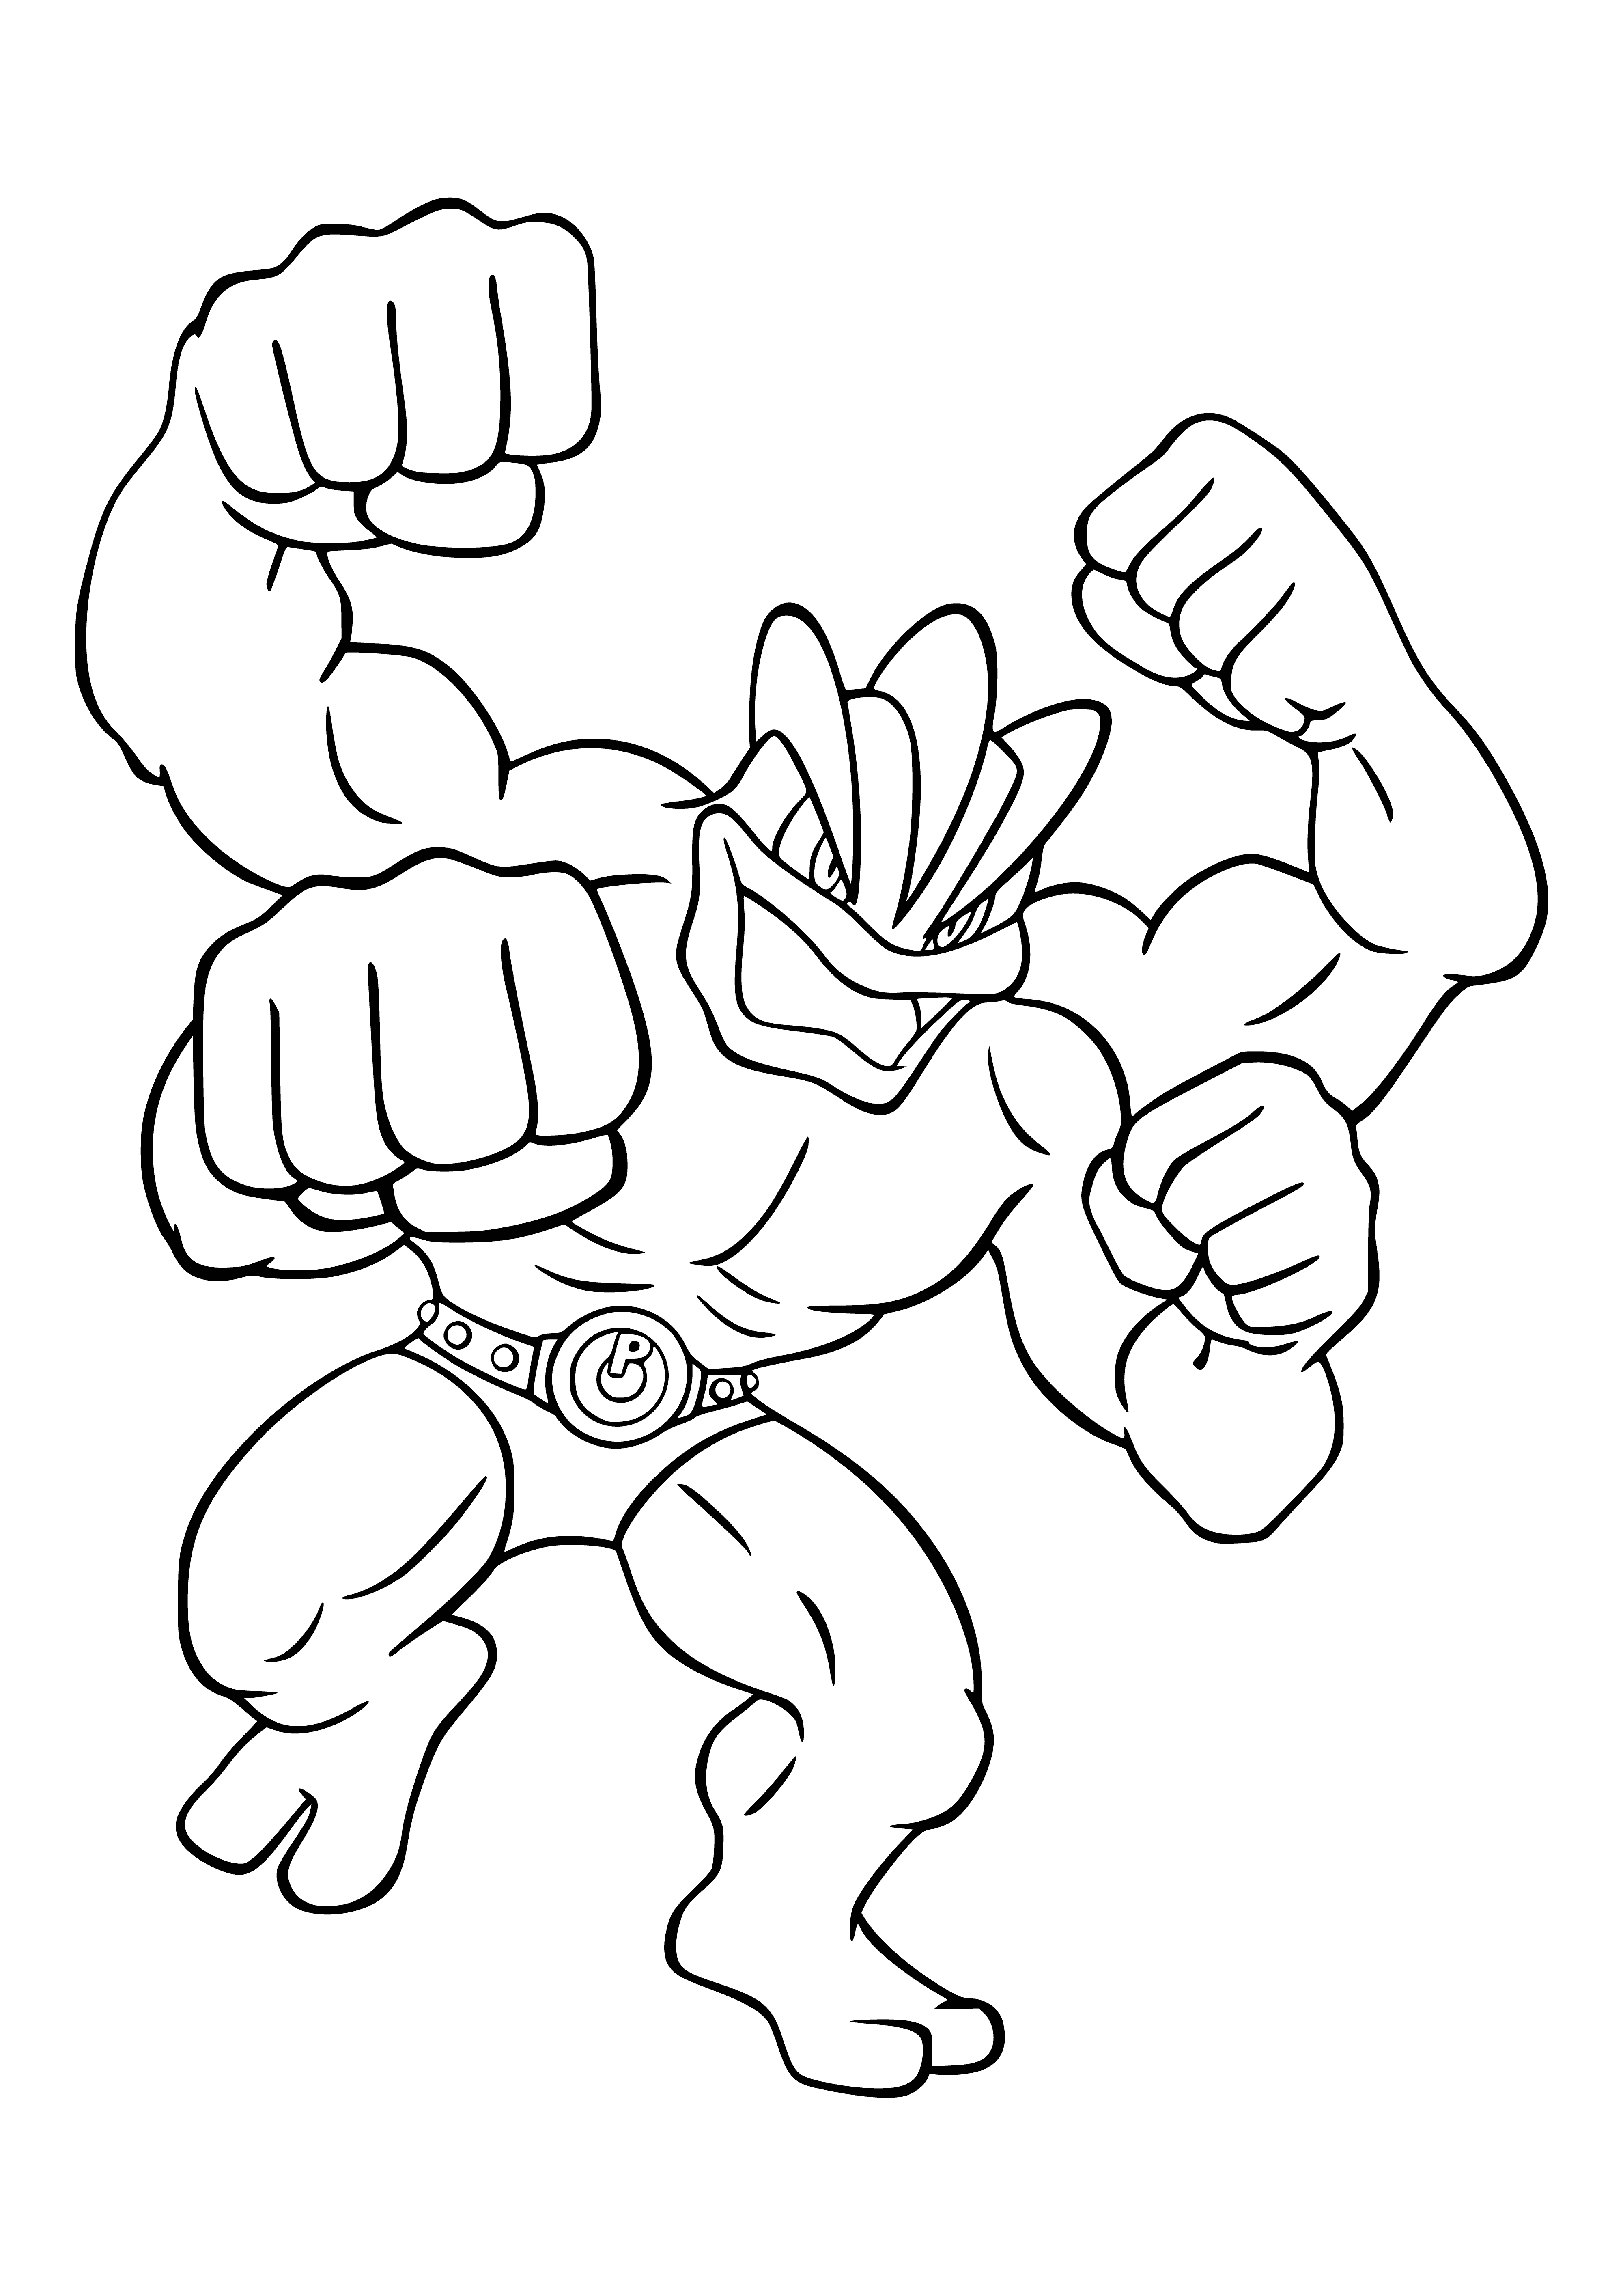 coloring page: A large, muscular four-armed Pokémon with tan body and swirled pattern on chest and brown ridge down back. Small head with beady eyes and wide mouth.